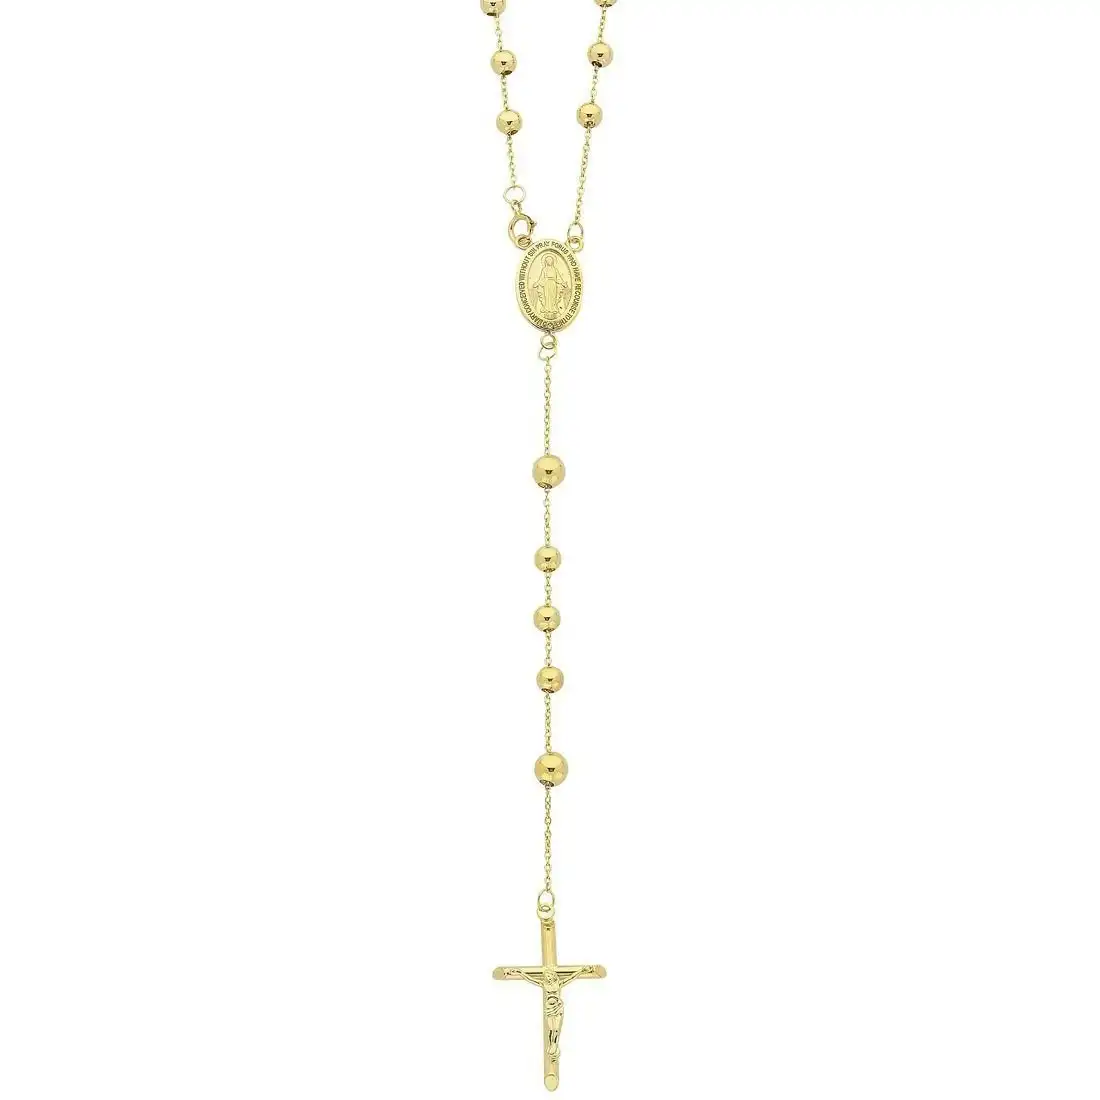 9ct Yellow Gold Silver Infused Rosary Beads Crucifix Cross Necklace